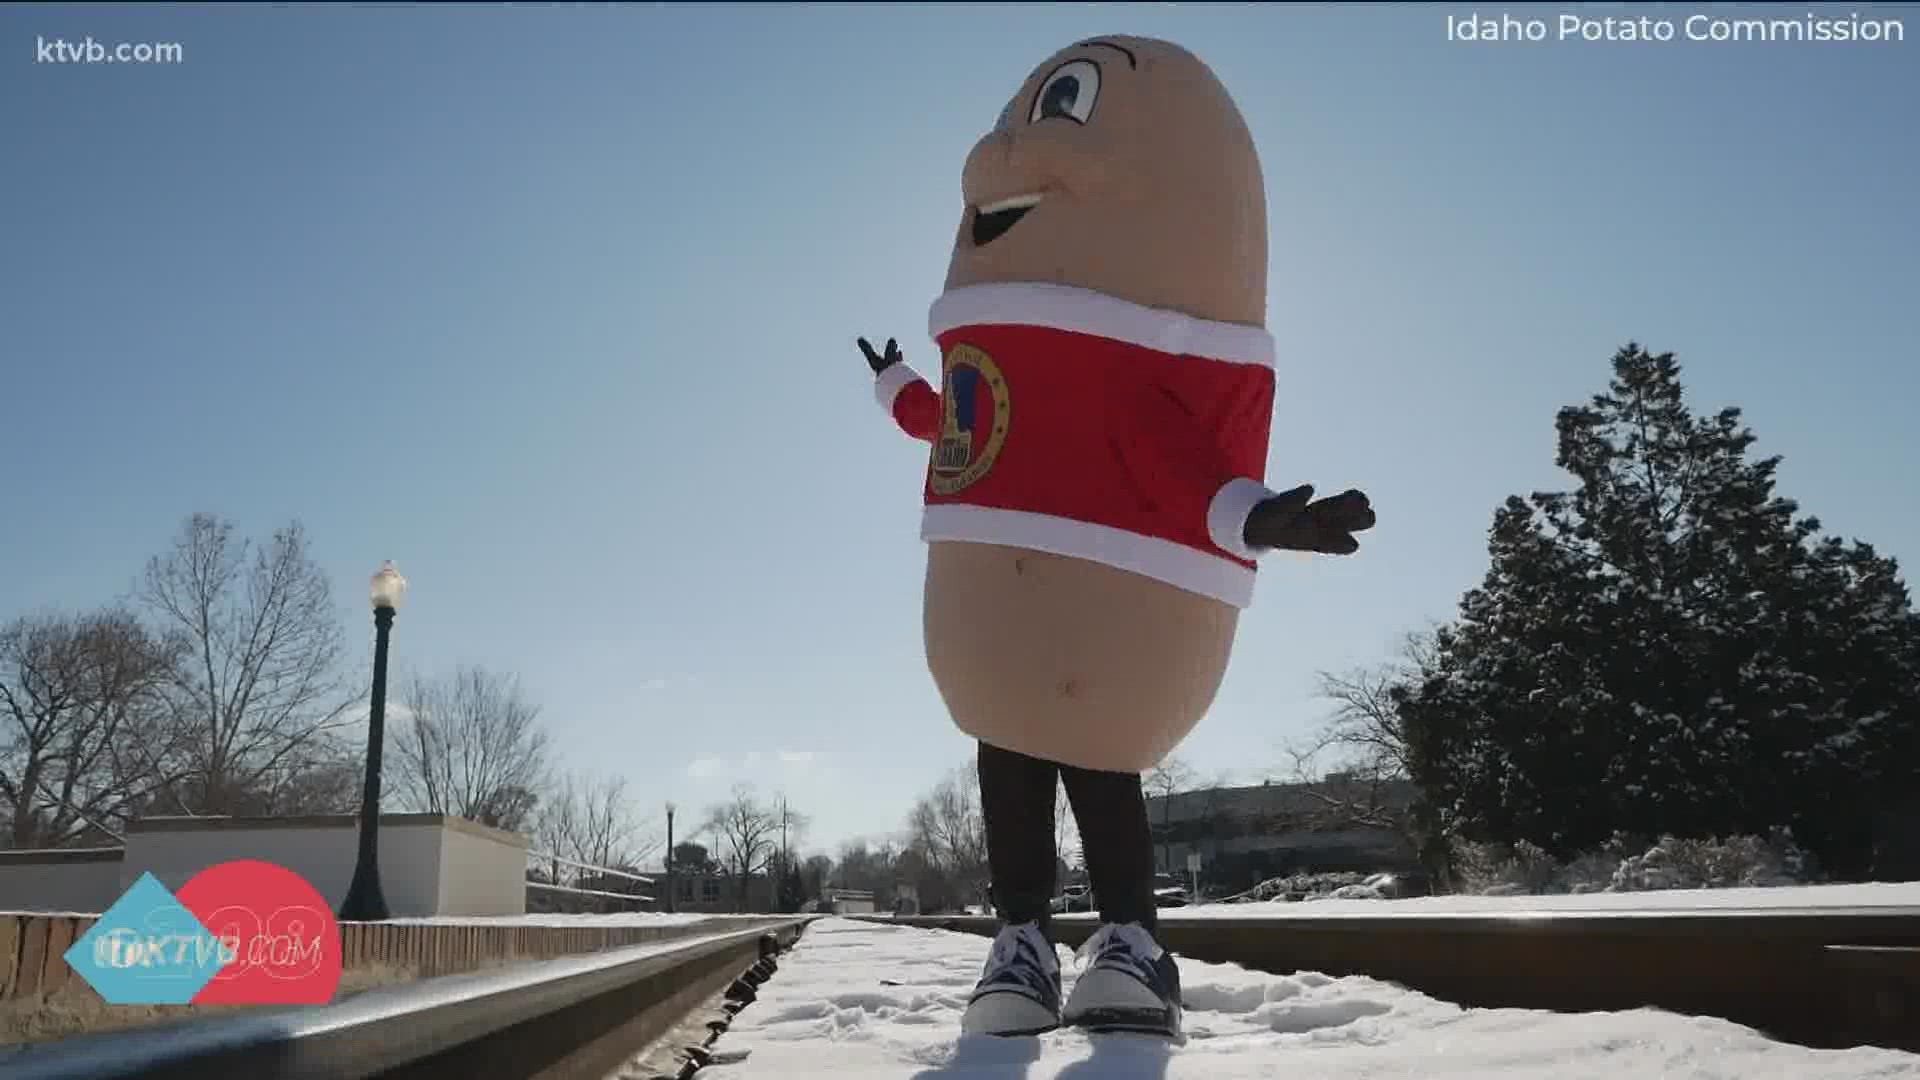 Spuddy Buddy first hit the national spotlight on NBC's "Today," and has toured the nation to spread the word about the Gem State's most "famous" farm product.